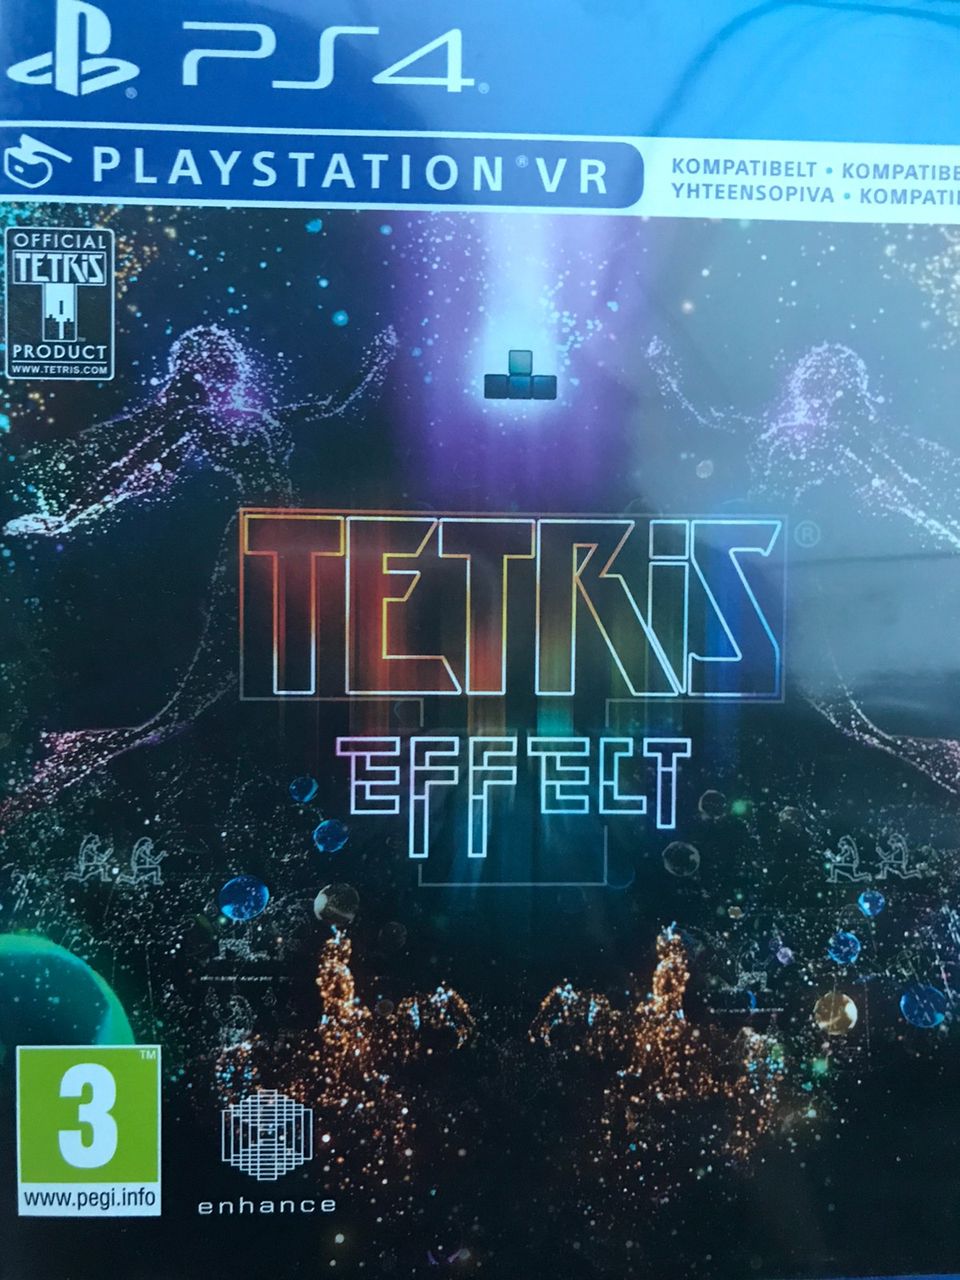 PS4 + Playstation VR The Tetris Effect